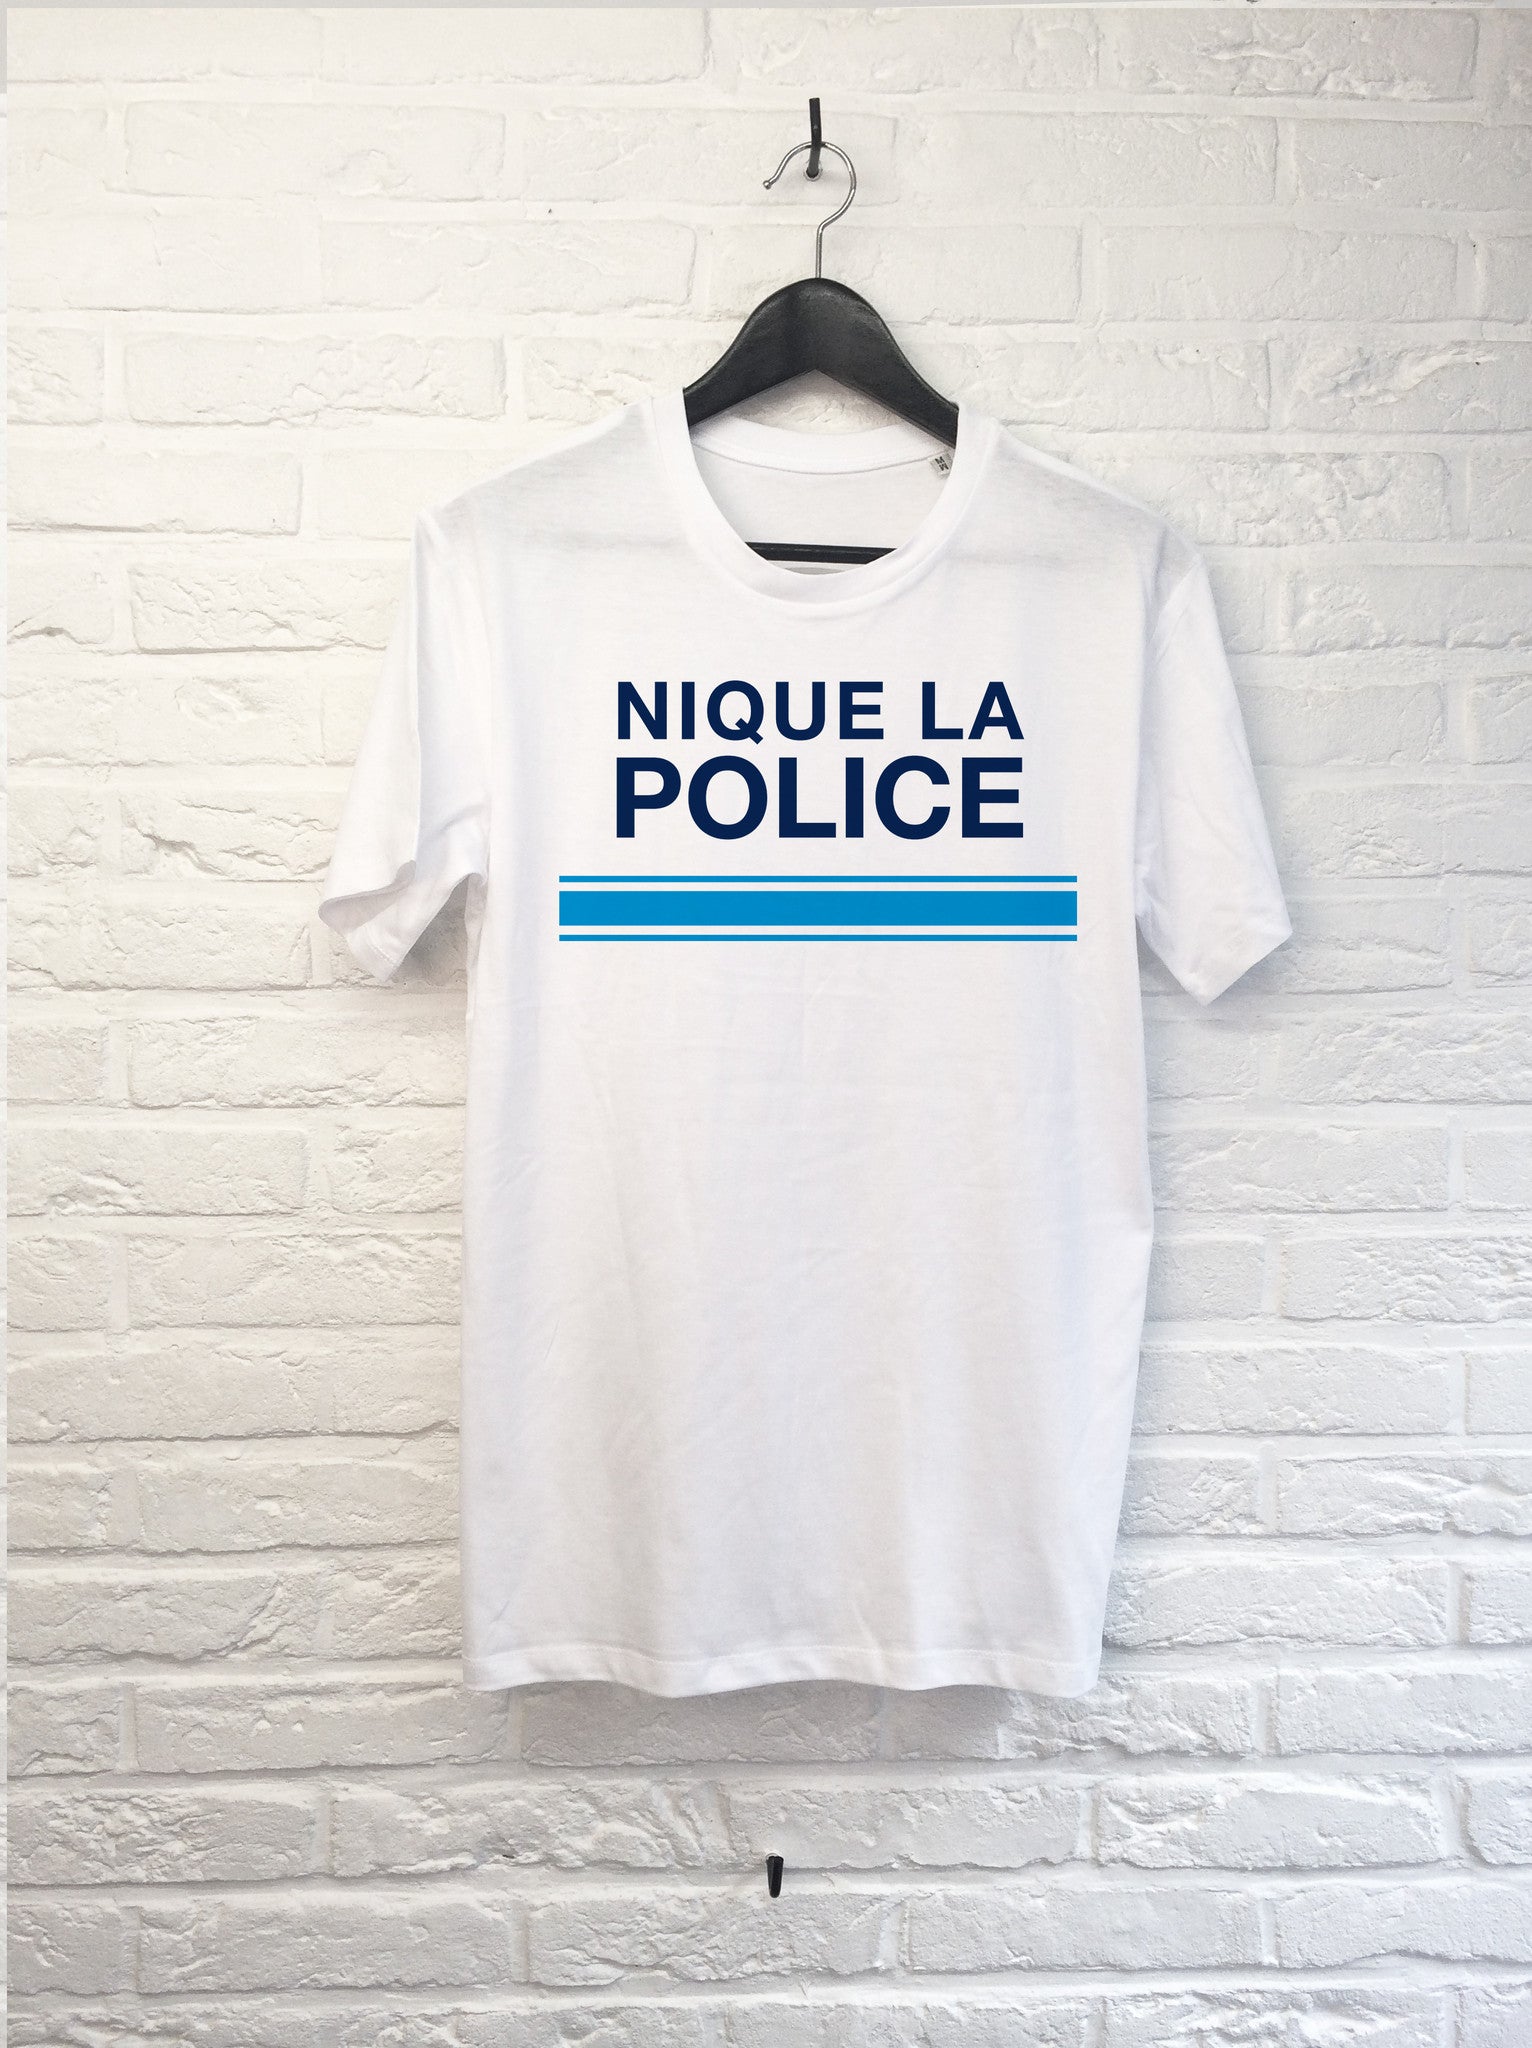 Police-T shirt-Atelier Amelot